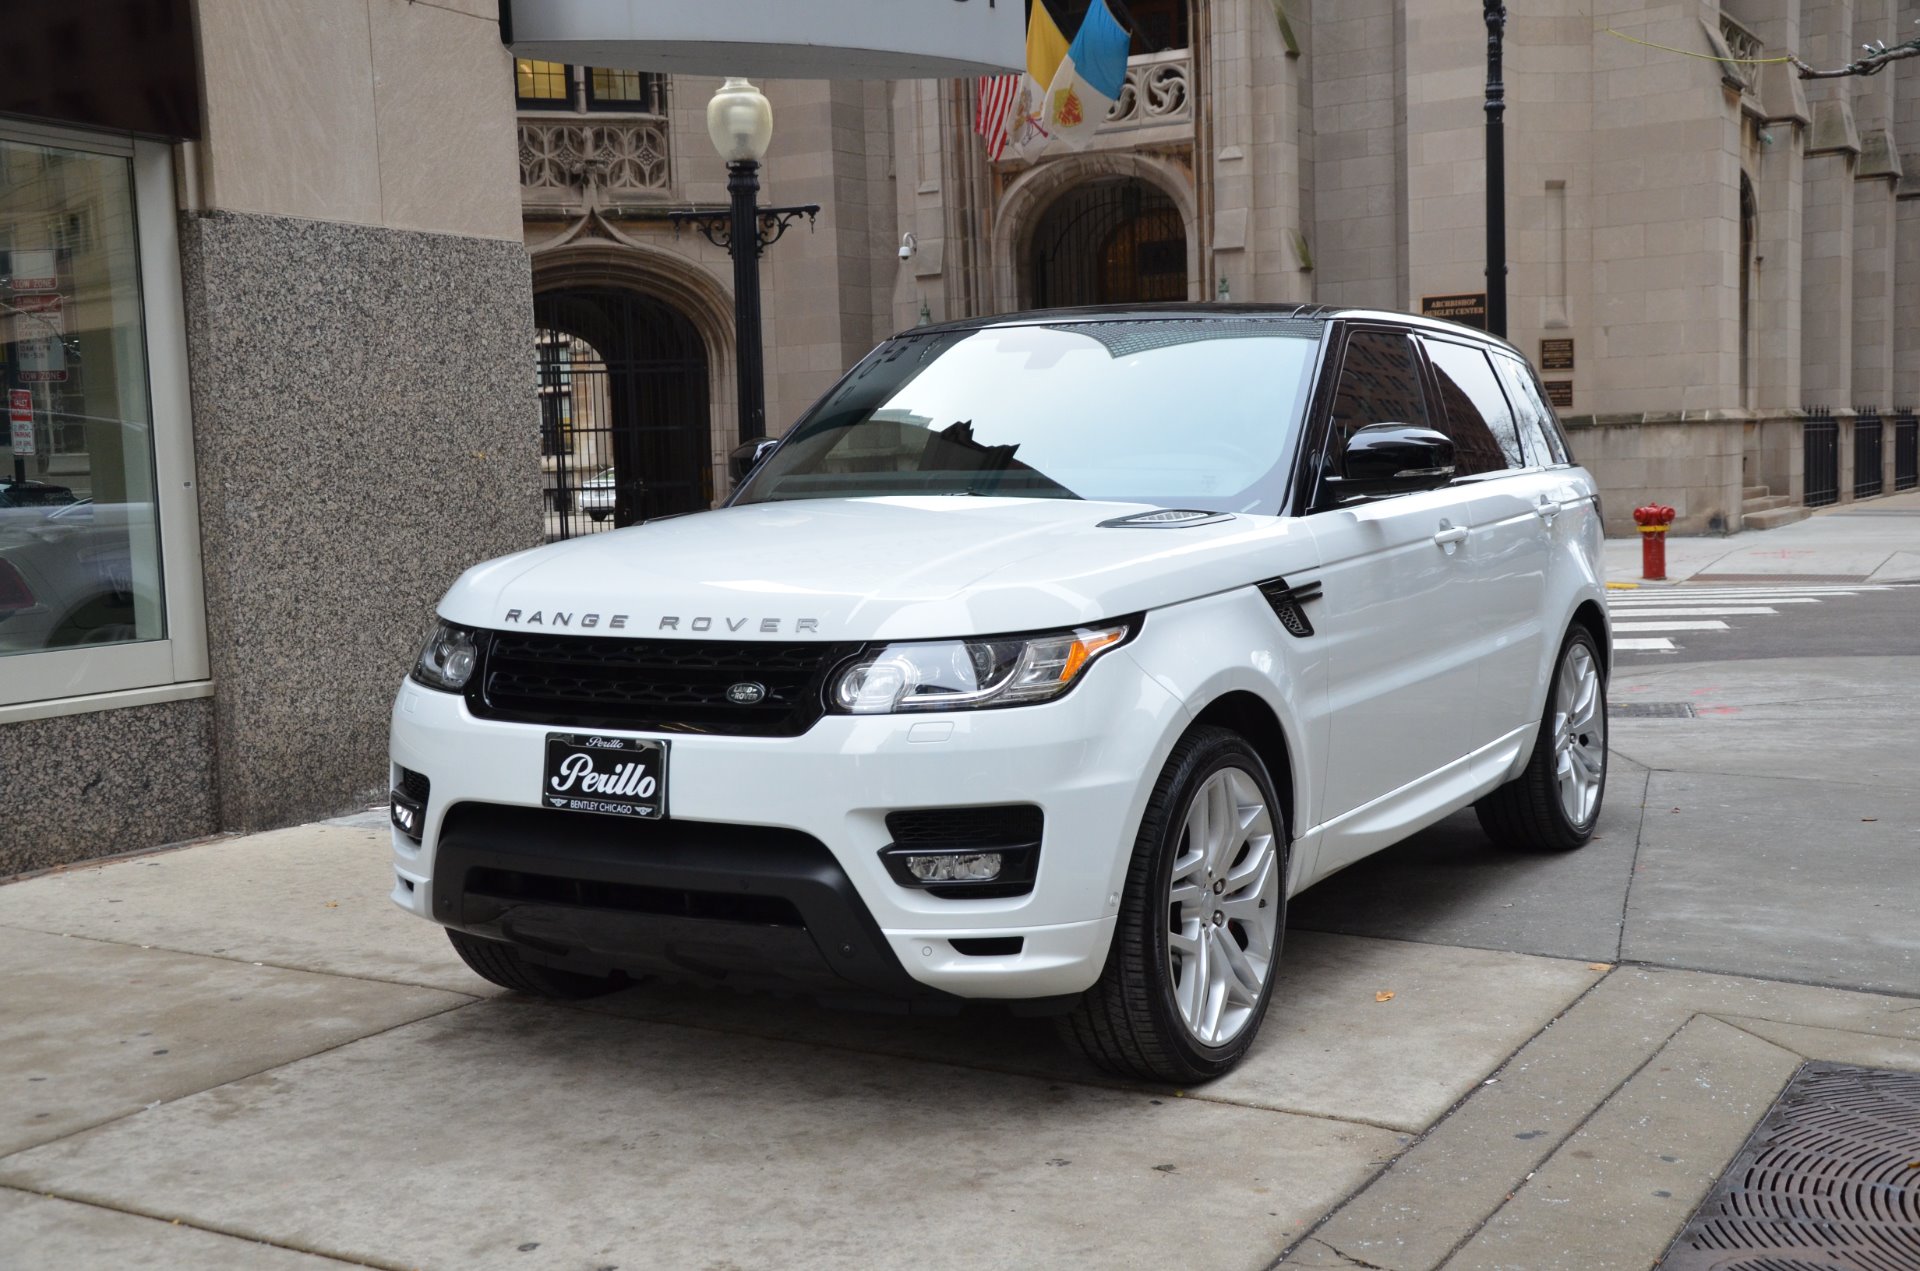 2015 Land Rover Range Rover Sport Autobiography Stock # B827A-S for sale  near Chicago, IL | IL Land Rover Dealer